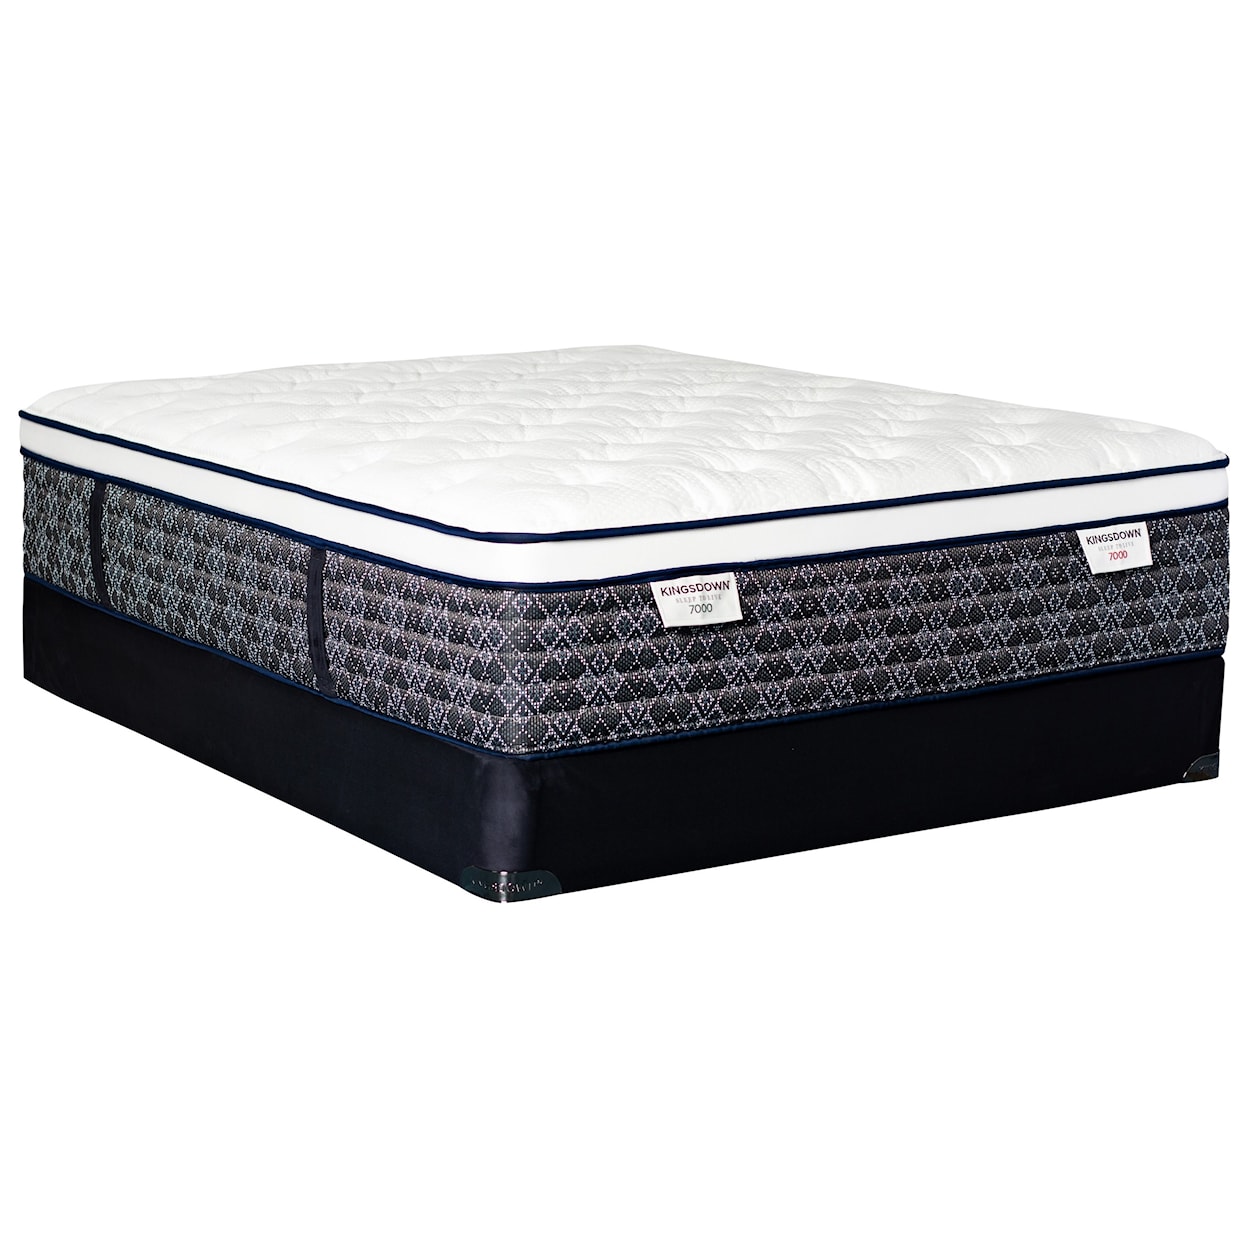 Kingsdown Sleep to Live 7000 Green Red ET Twin Pocketed Coil Mattress Set